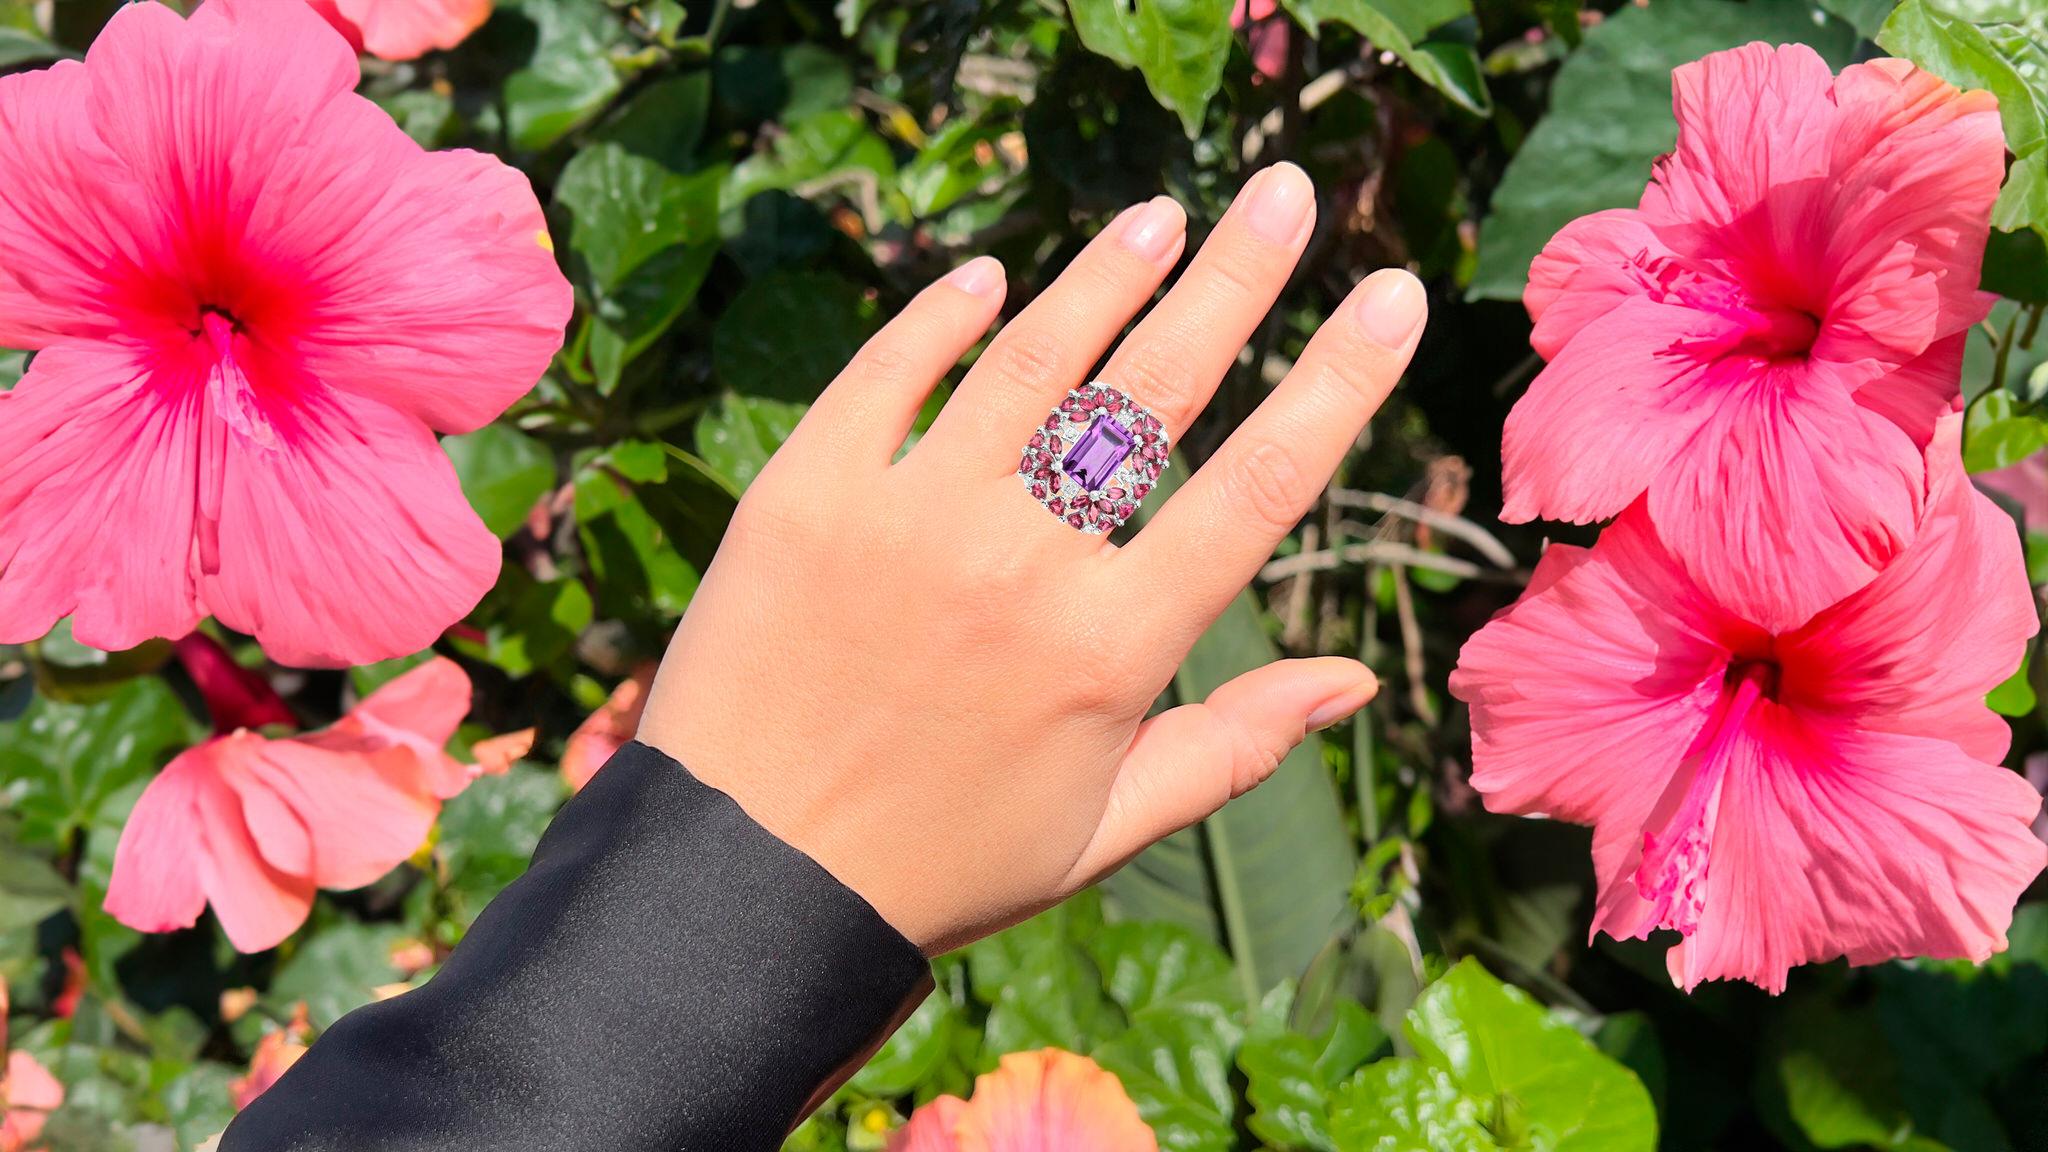 It comes with the Gemological Appraisal by GIA GG/AJP
All Gemstones are Natural
Amethyst = 3.60 Carat
Stone Size: 12 x 8 mm
Cut: Emerald
Rhodolite Garnets = 3.85 Carats
White Topazes = 0.15 Carts
Metal: Rhodium Plated Sterling Silver
Ring Size: 8*